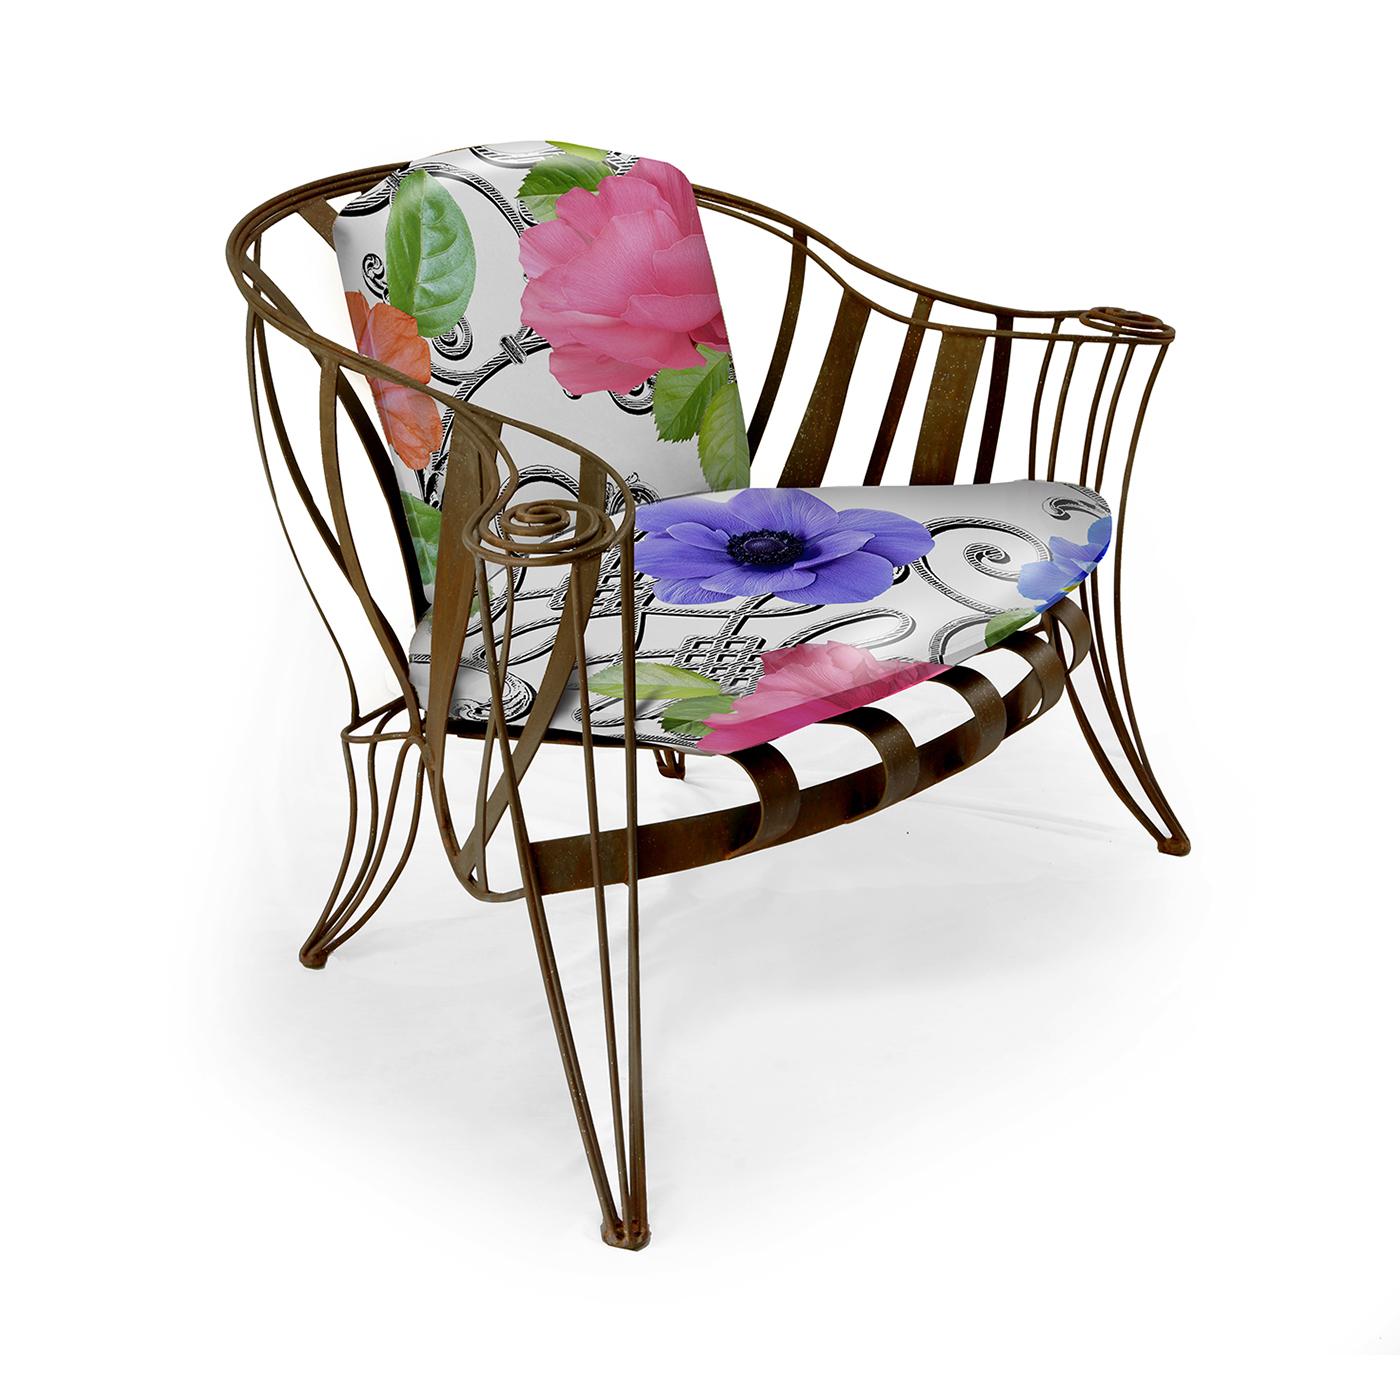 Introducing the opulent Opus Garden White Flower armchair, a design piece by Carlo Rampazzi. This extraordinary piece boasts an intricately hand-bended iron frame, meticulously treated with rust-resistant protection. To enhance comfort, the sofa is